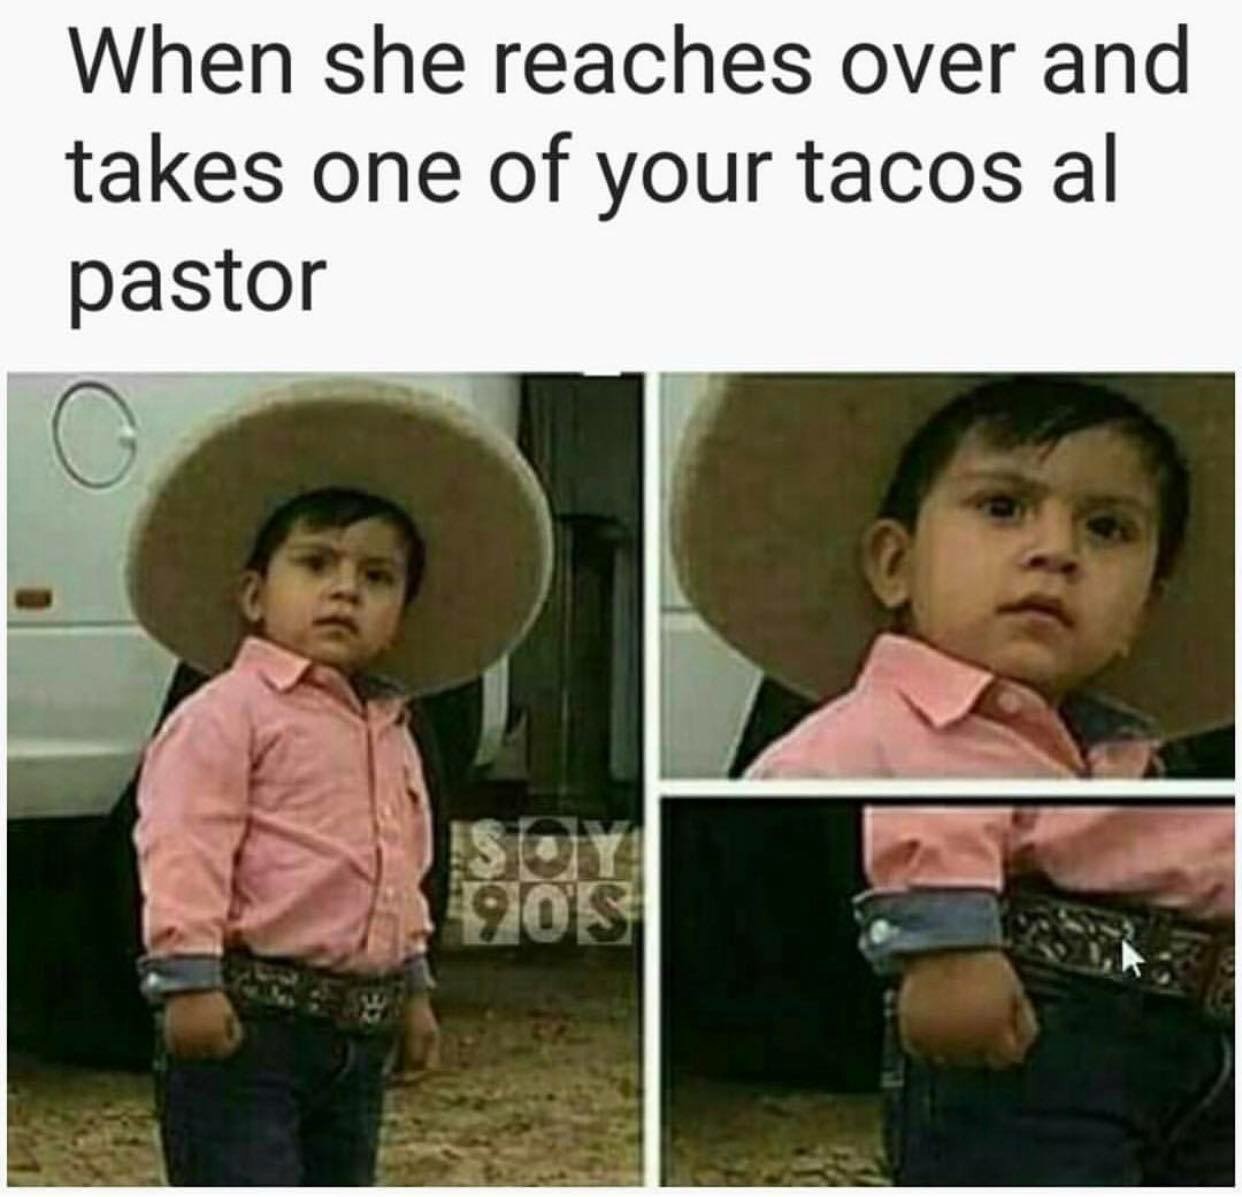 al pastor memes - When she reaches over and takes one of your tacos al pastor